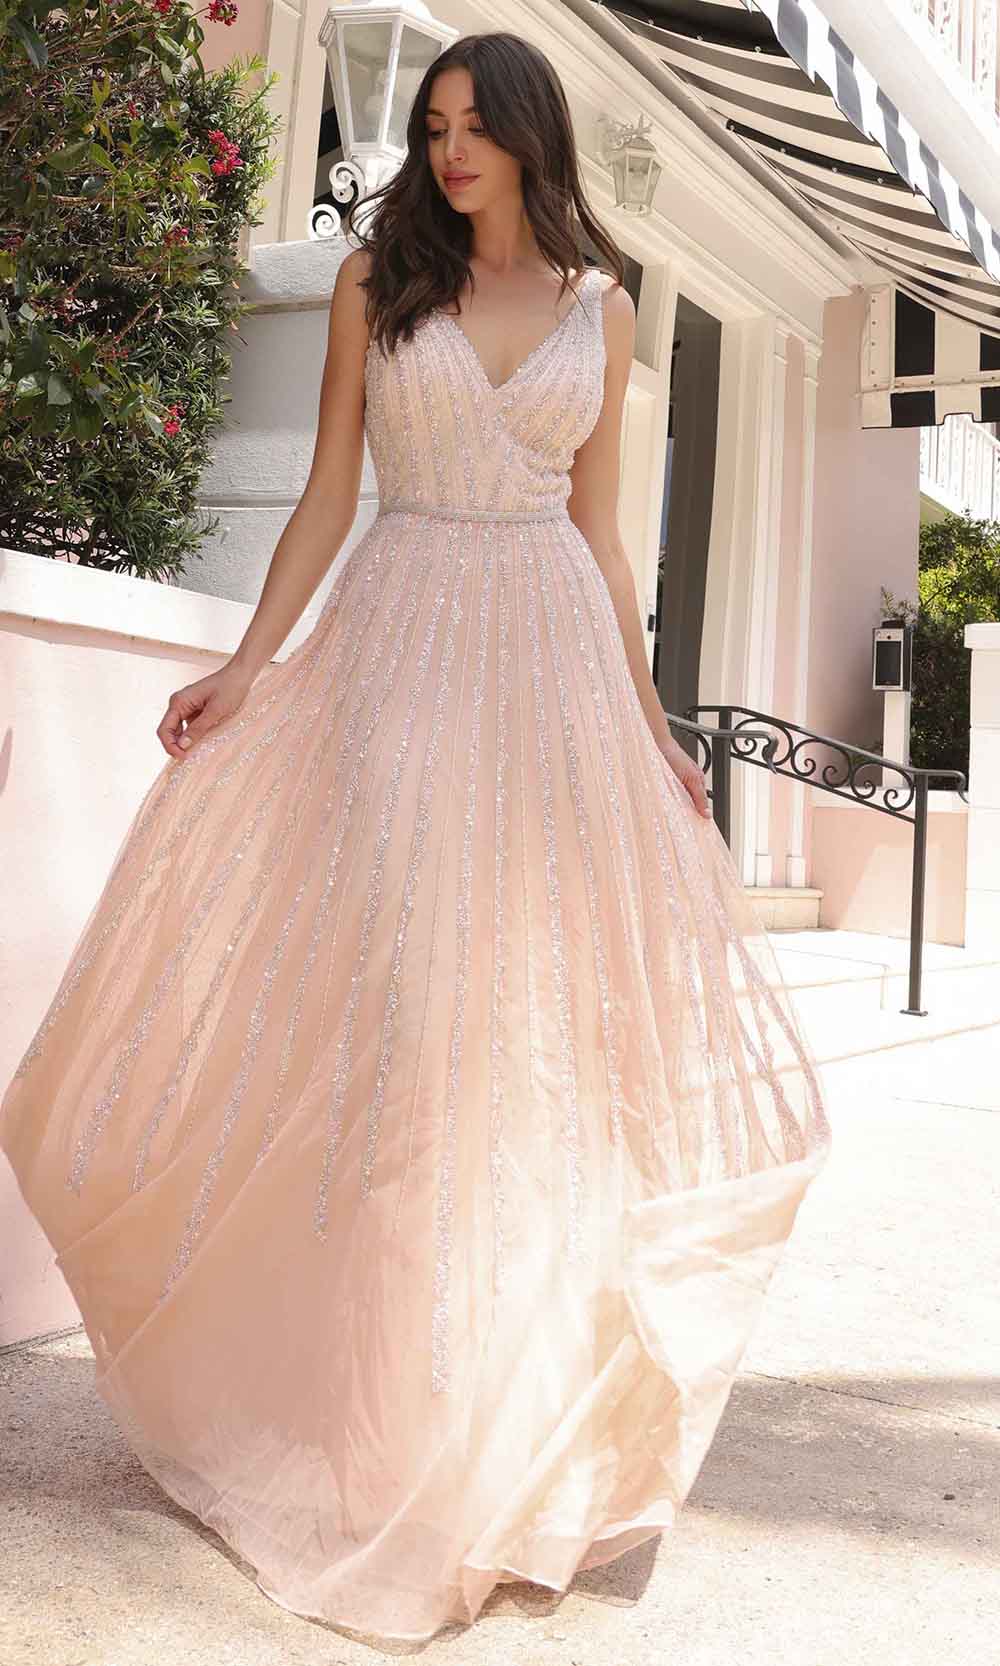 Image of Primavera Couture 12116 - V-Neck Linear Beaded Prom Gown